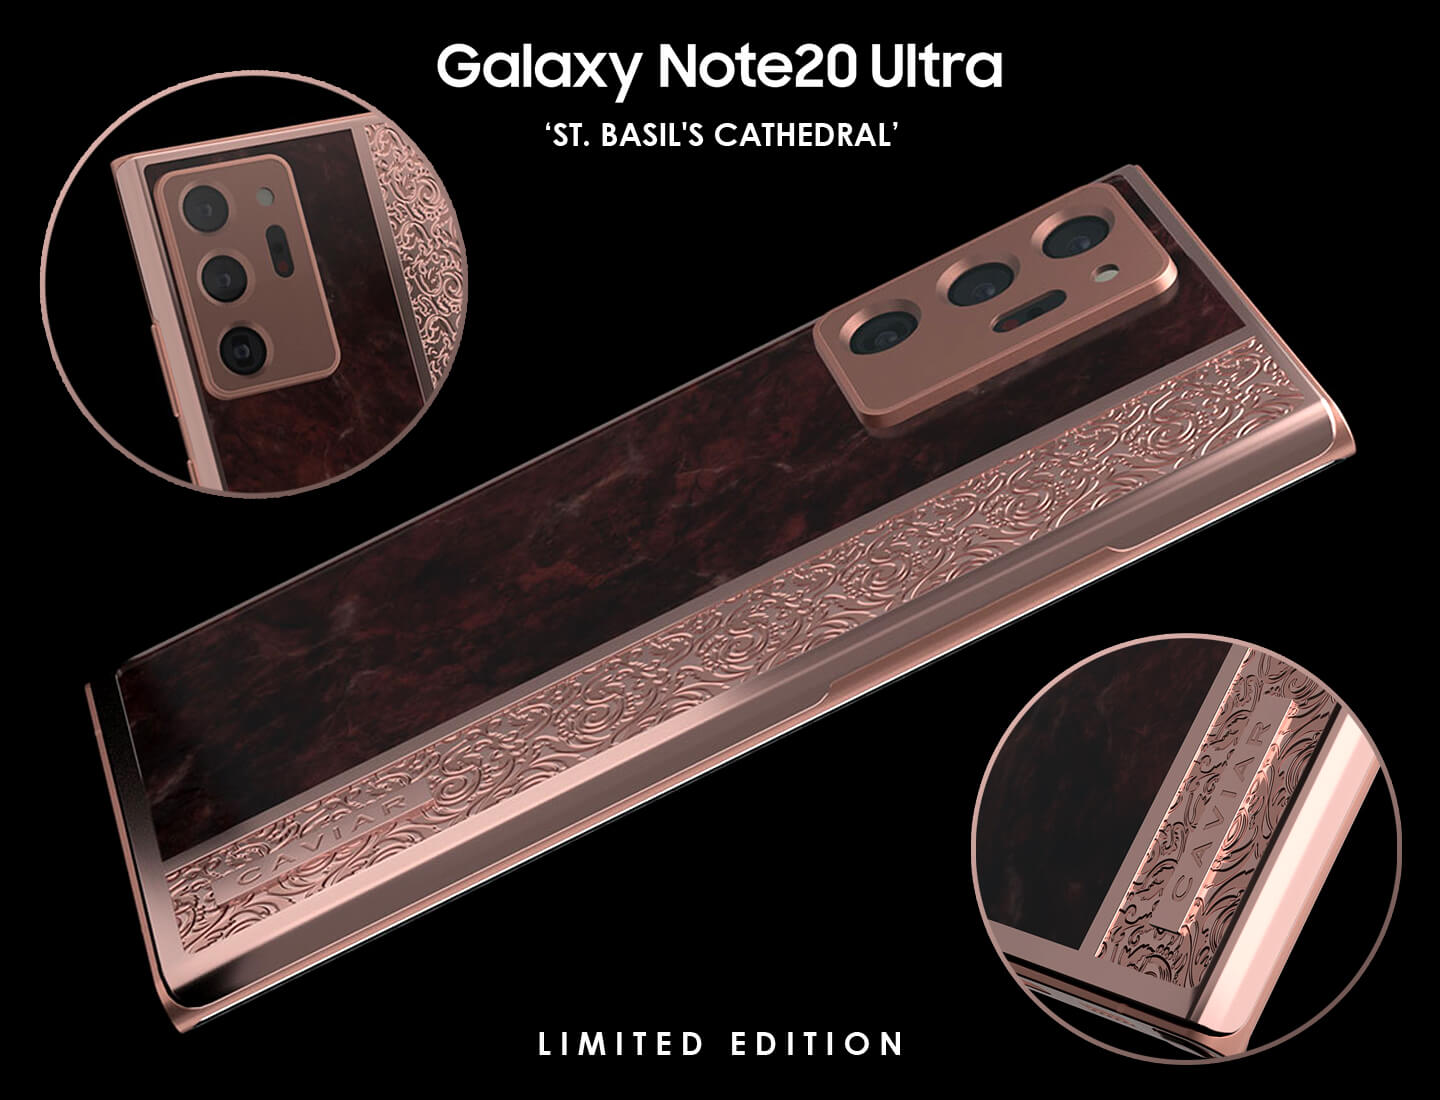 Limited Edition smartphones